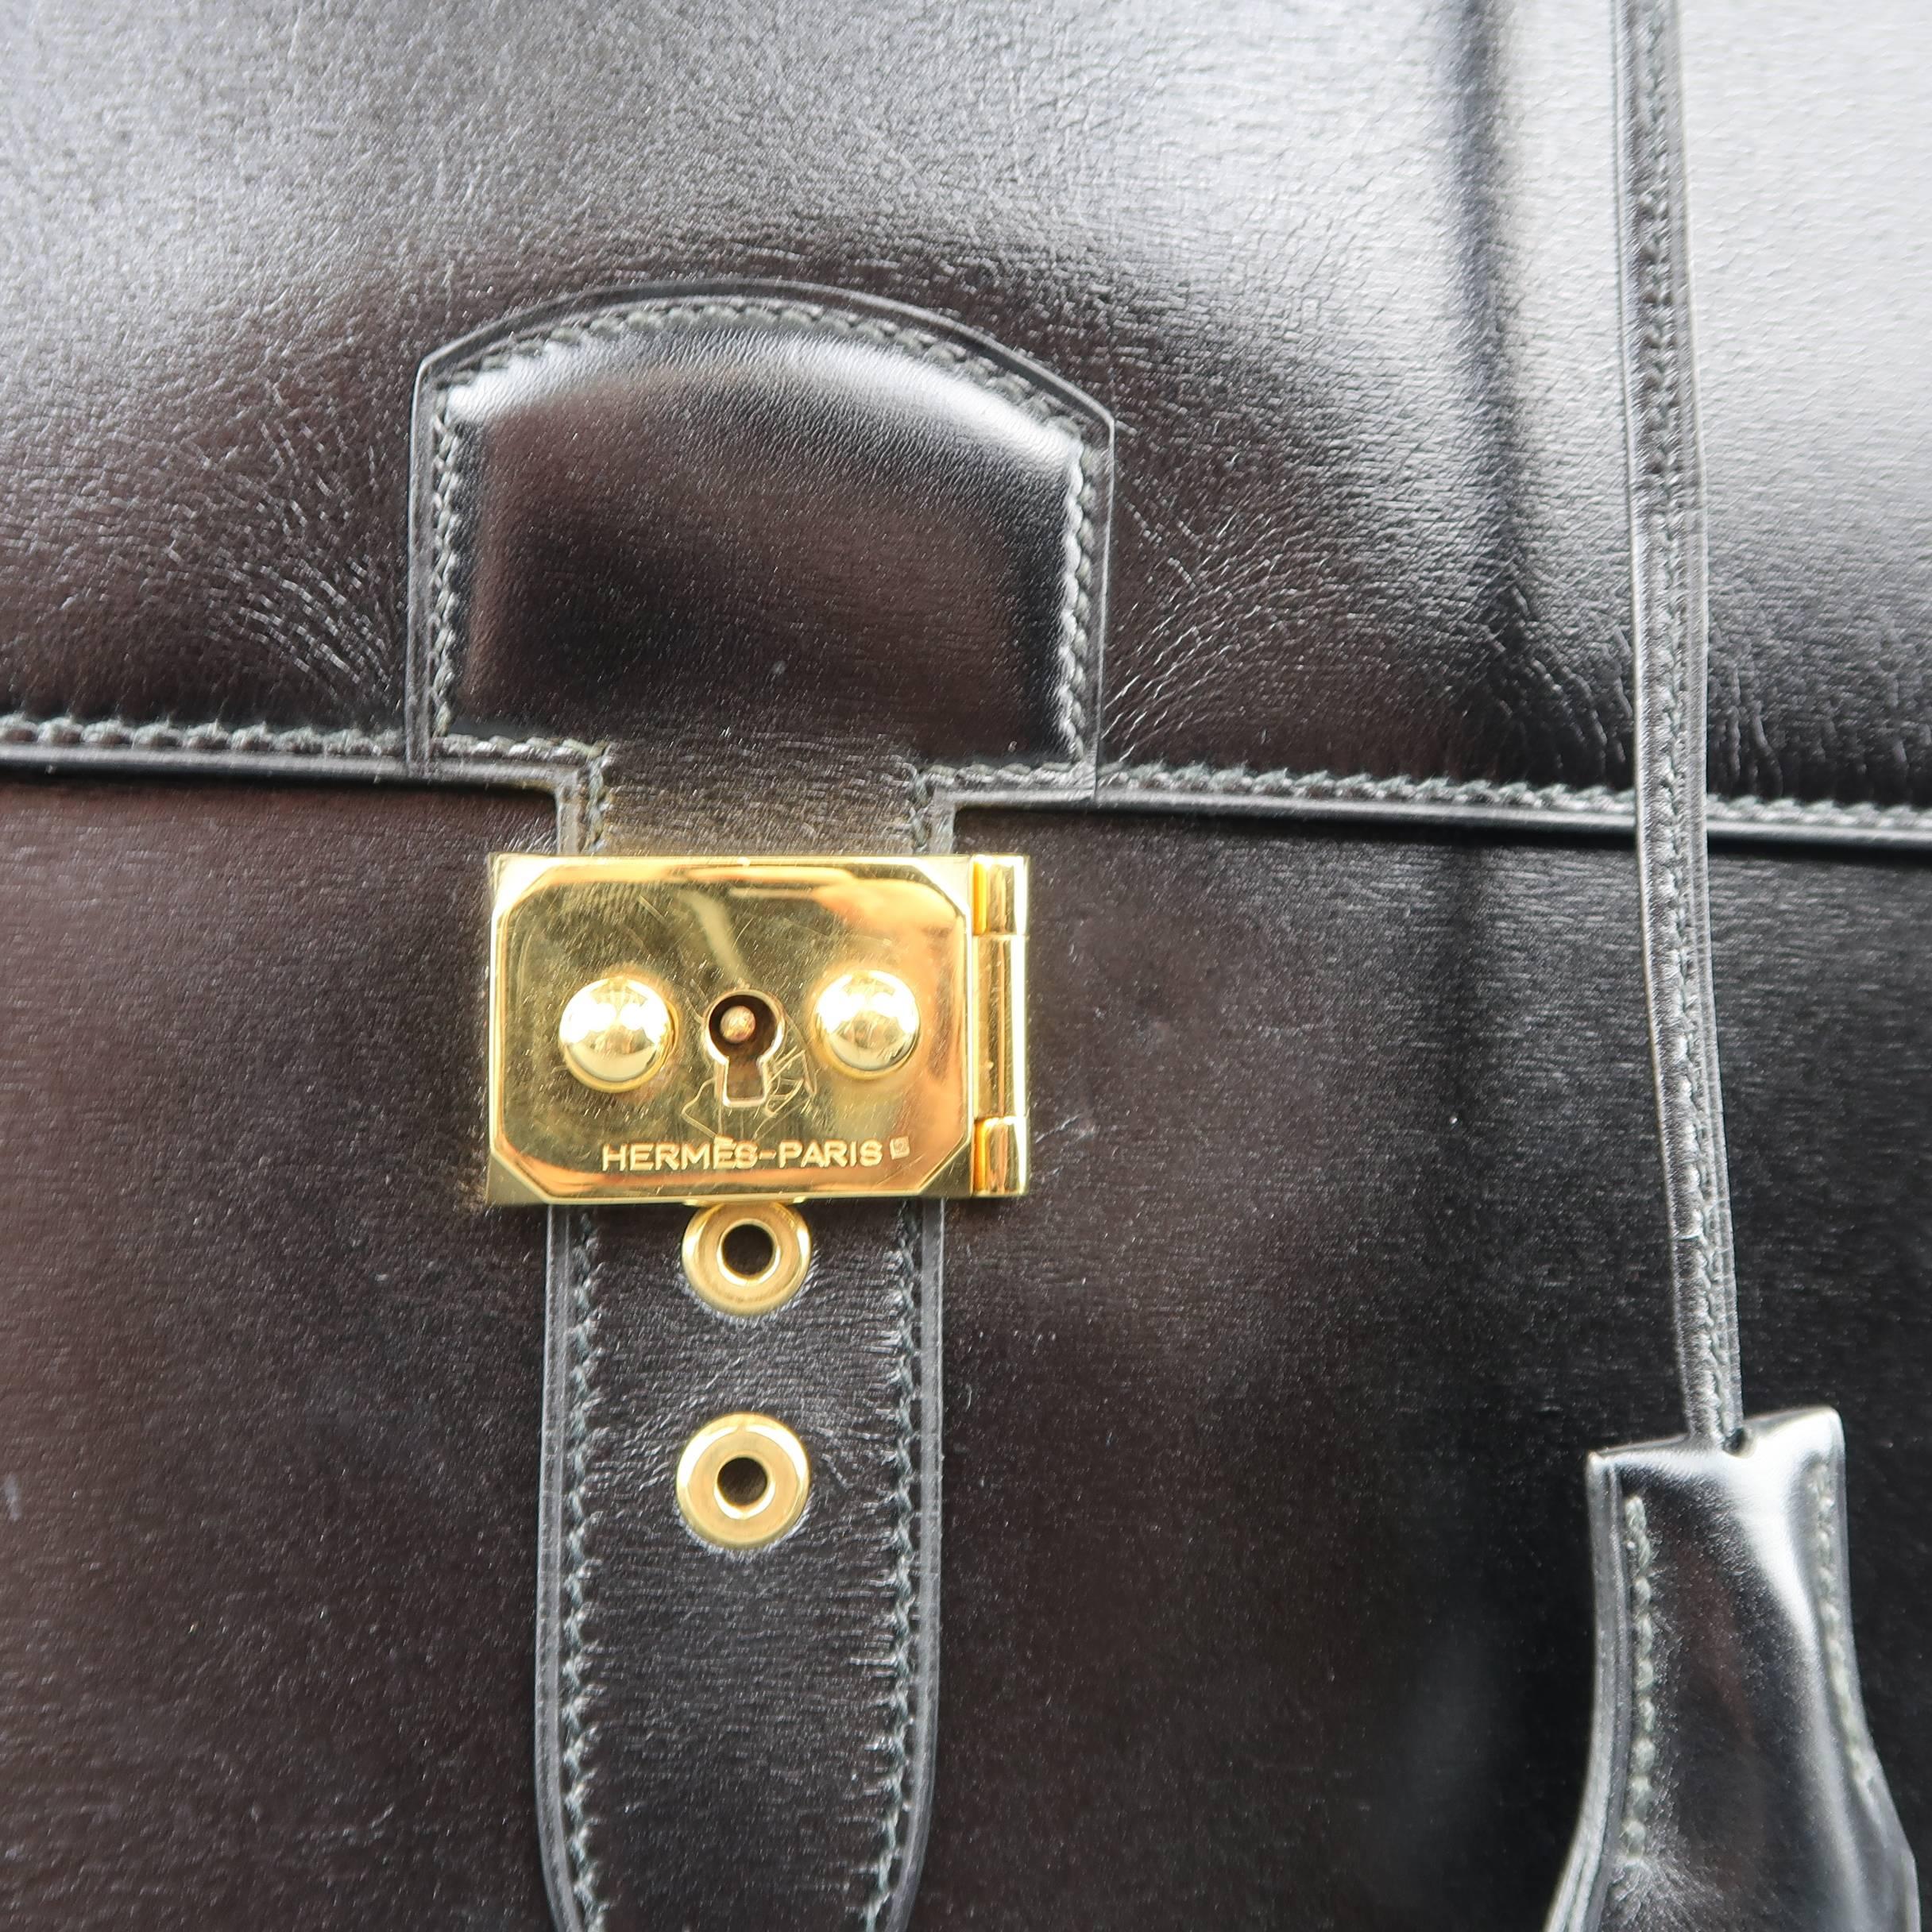 Vintage HERMES Sac a Depeches 41 briefcase comes in black leather with a top flap, gold tone embossed metal lock closure, leather top handle, clochette, and multiple storage sections. Minor wear. Made in France. Blind stamped circle T from 1990.
